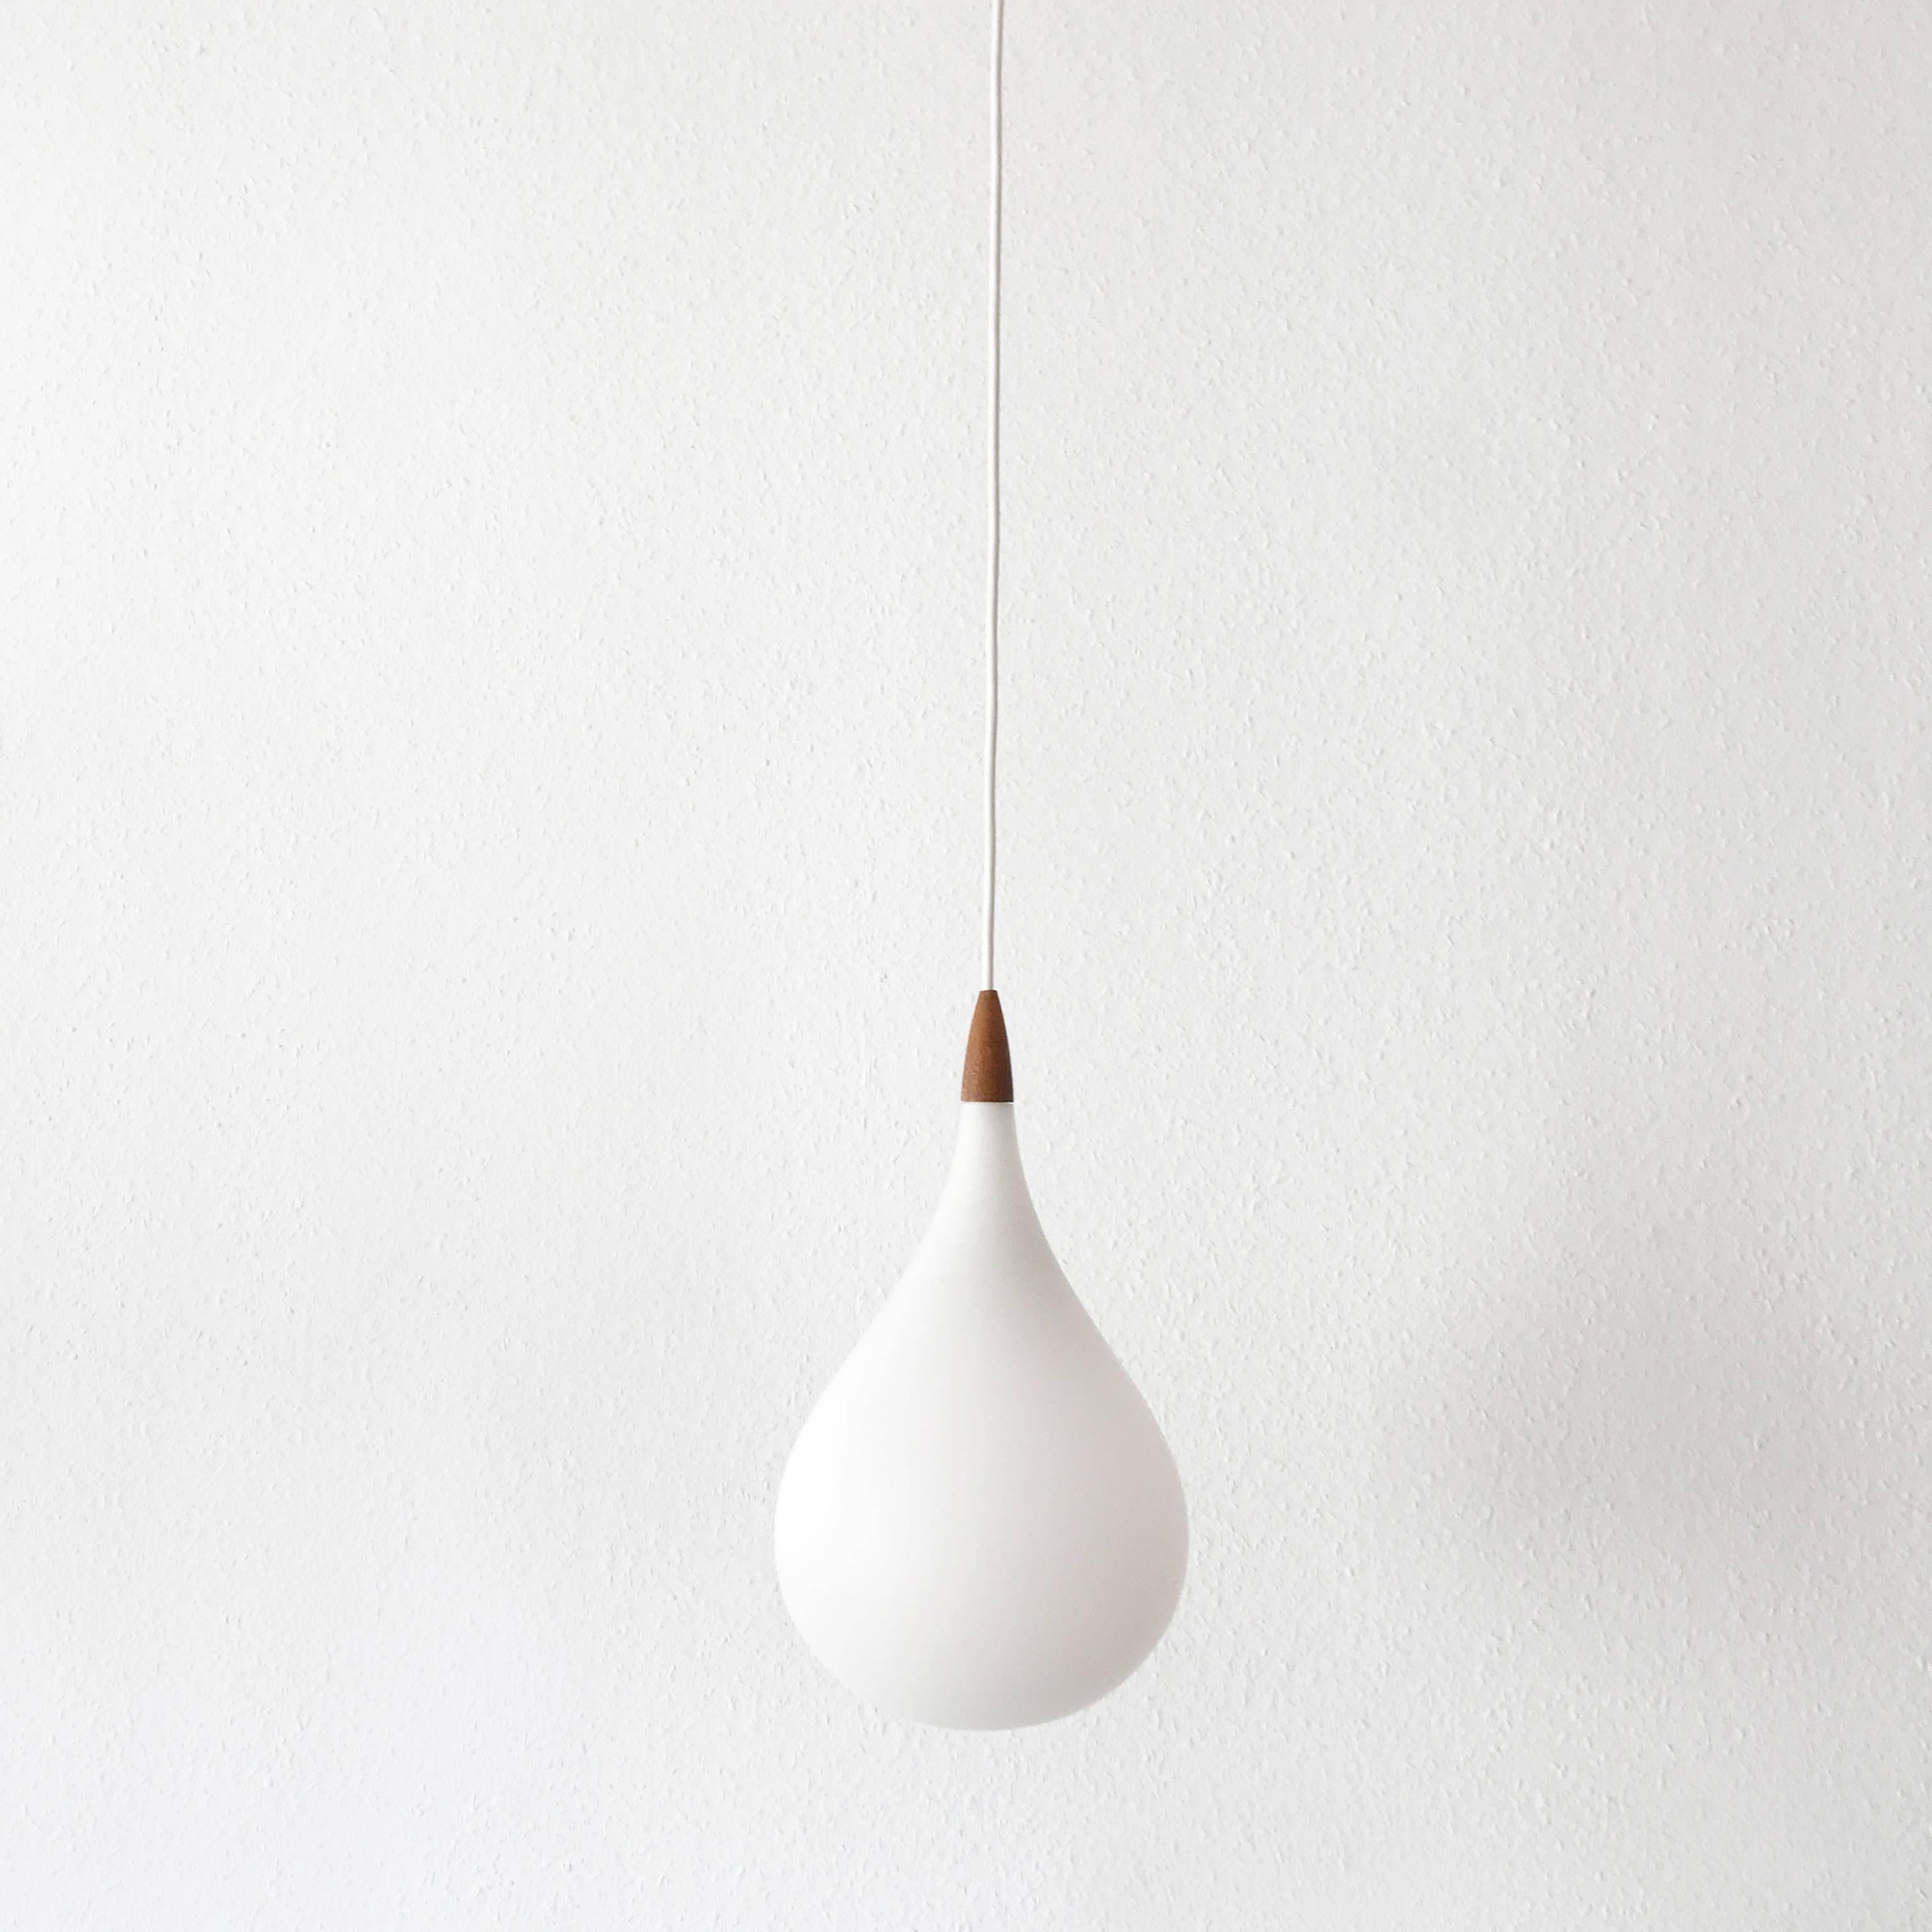 Exceptional and elegant pendant lamp Drop with one opaline glass shade in form of a water drop. Designed by Uno & Östen Kristiansson, 1957 for Luxus, Vittsjö, Sweden. The lamp is executed with one E27 screw fit bulb holder.